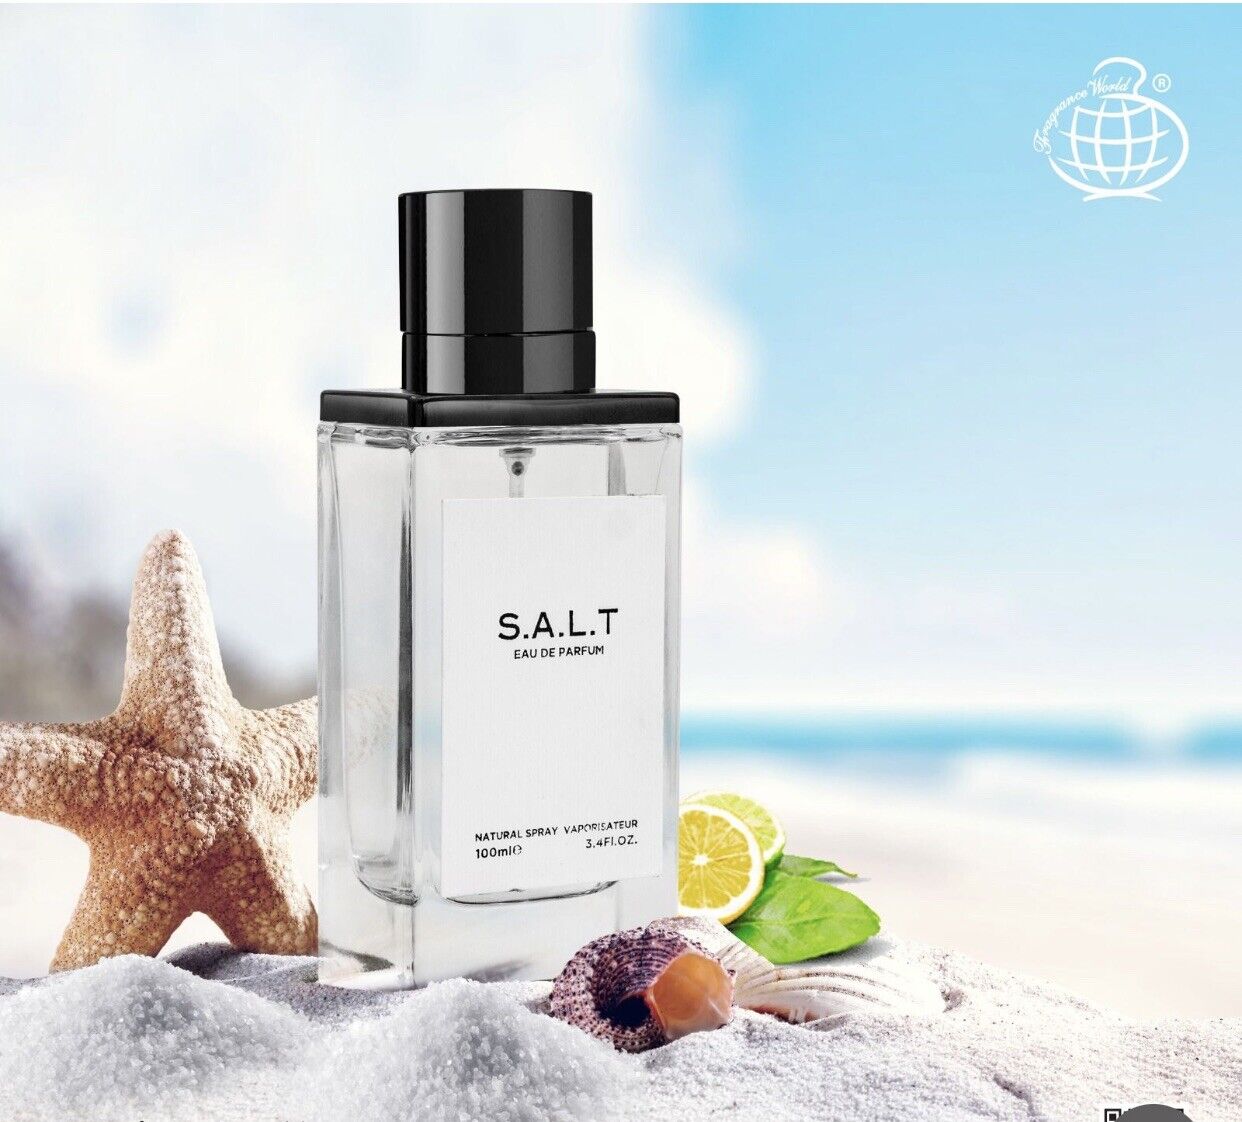 S.A.L.T EDP PEFUME BY FRAGRANCE WORLD 100ML - NEW RELEASE